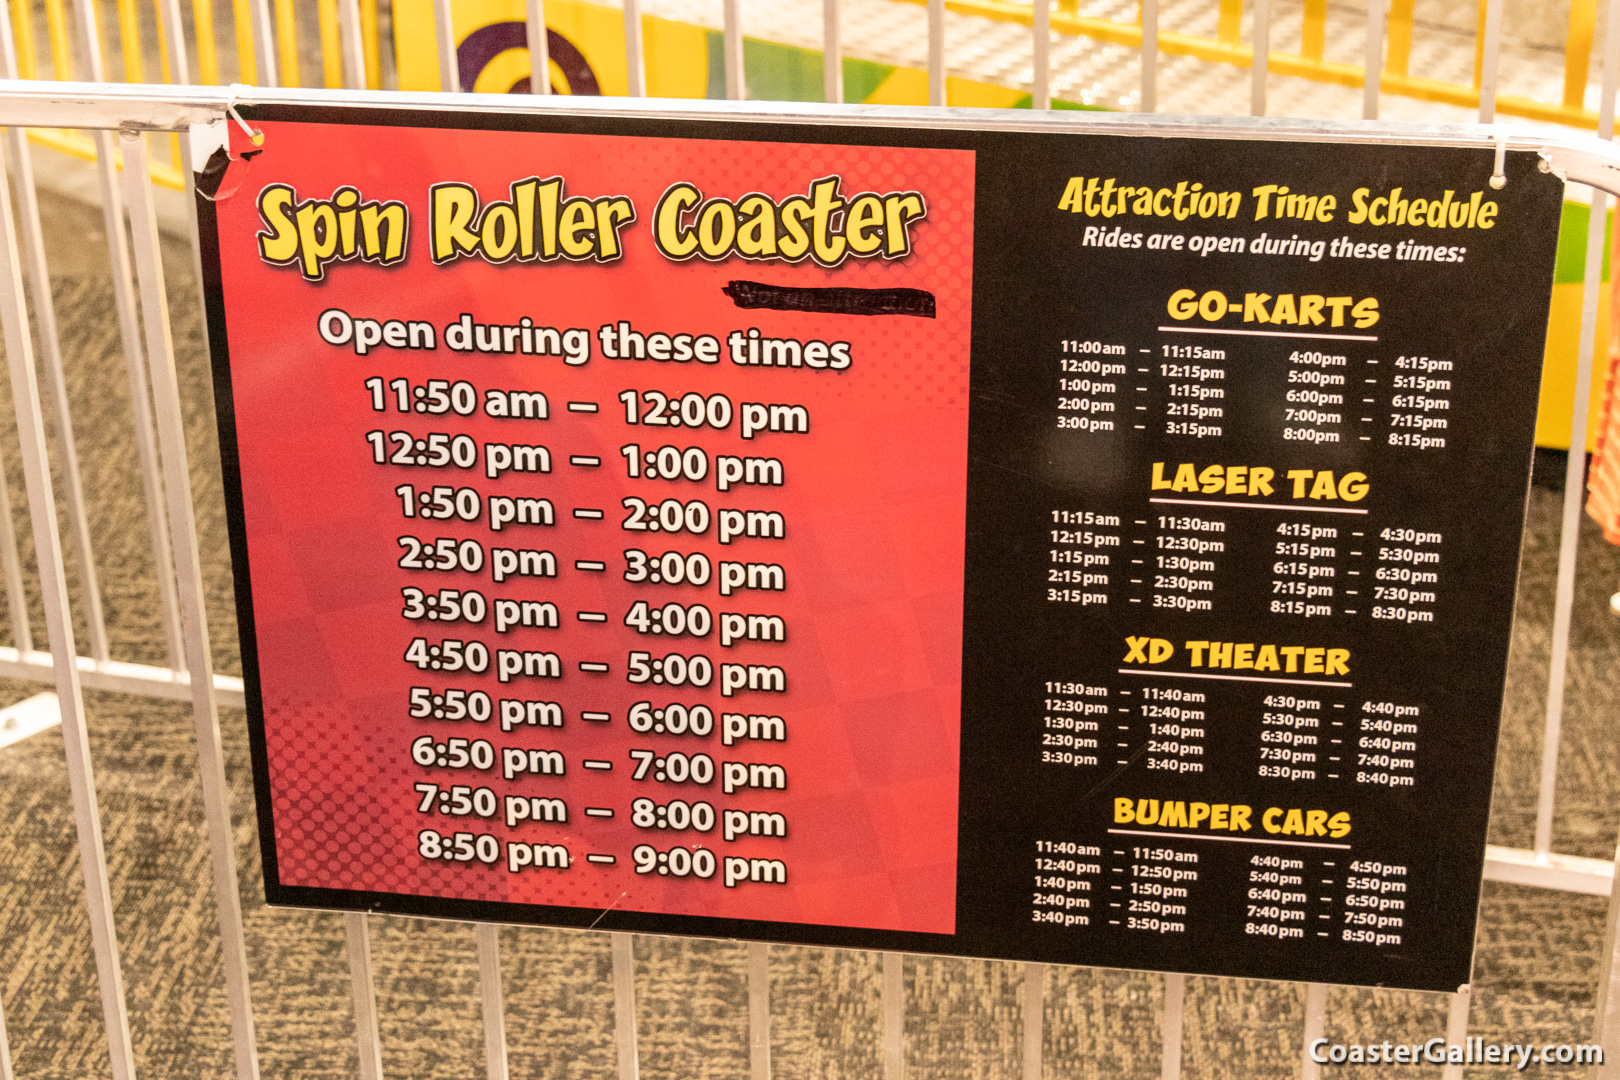 SBF Spinning Coaster - Incredible Spin Coaster at St. Louis's Incredible Pizza Company - Family Entertainment Center